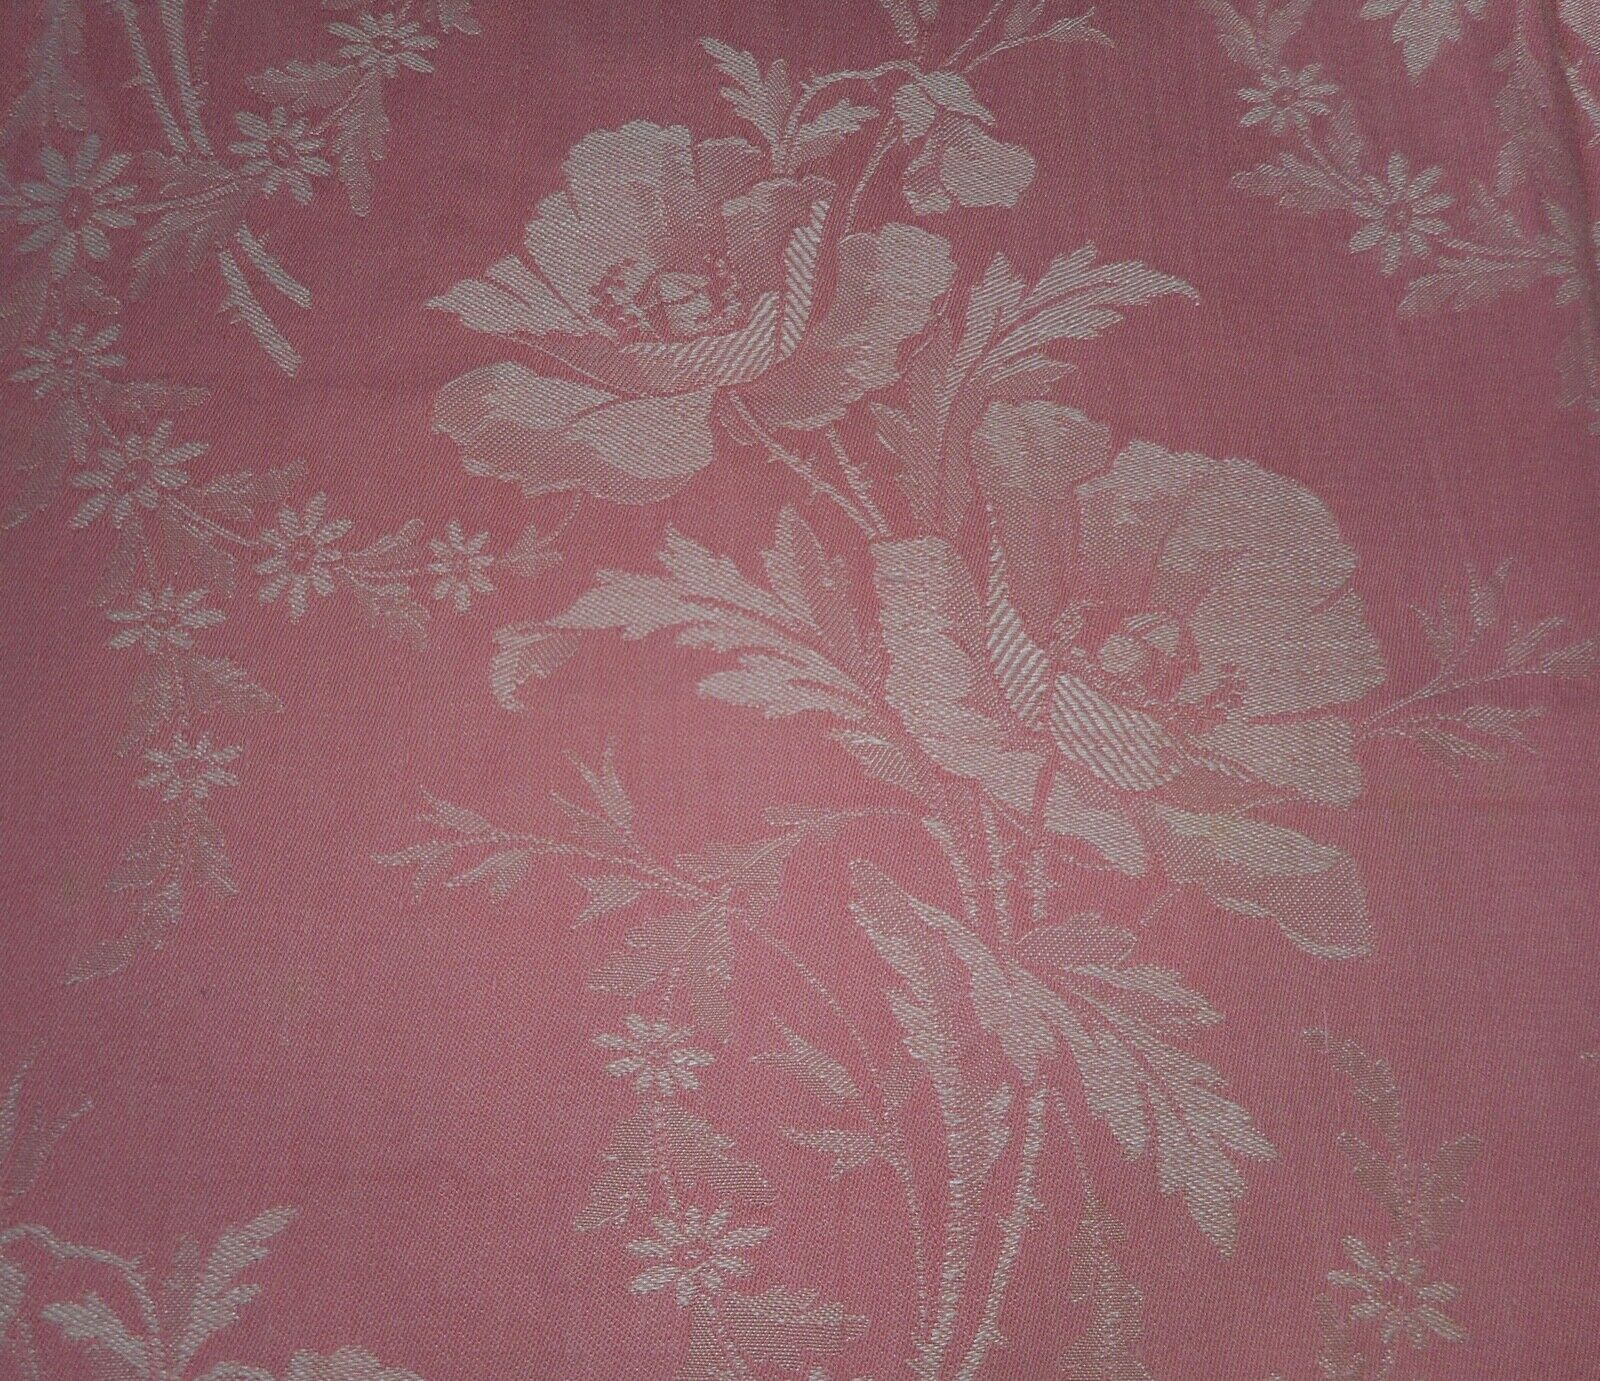 Antique French Shabby Floral Poppy Ticking Damask Cotton Fabric~Blush Coral Pink